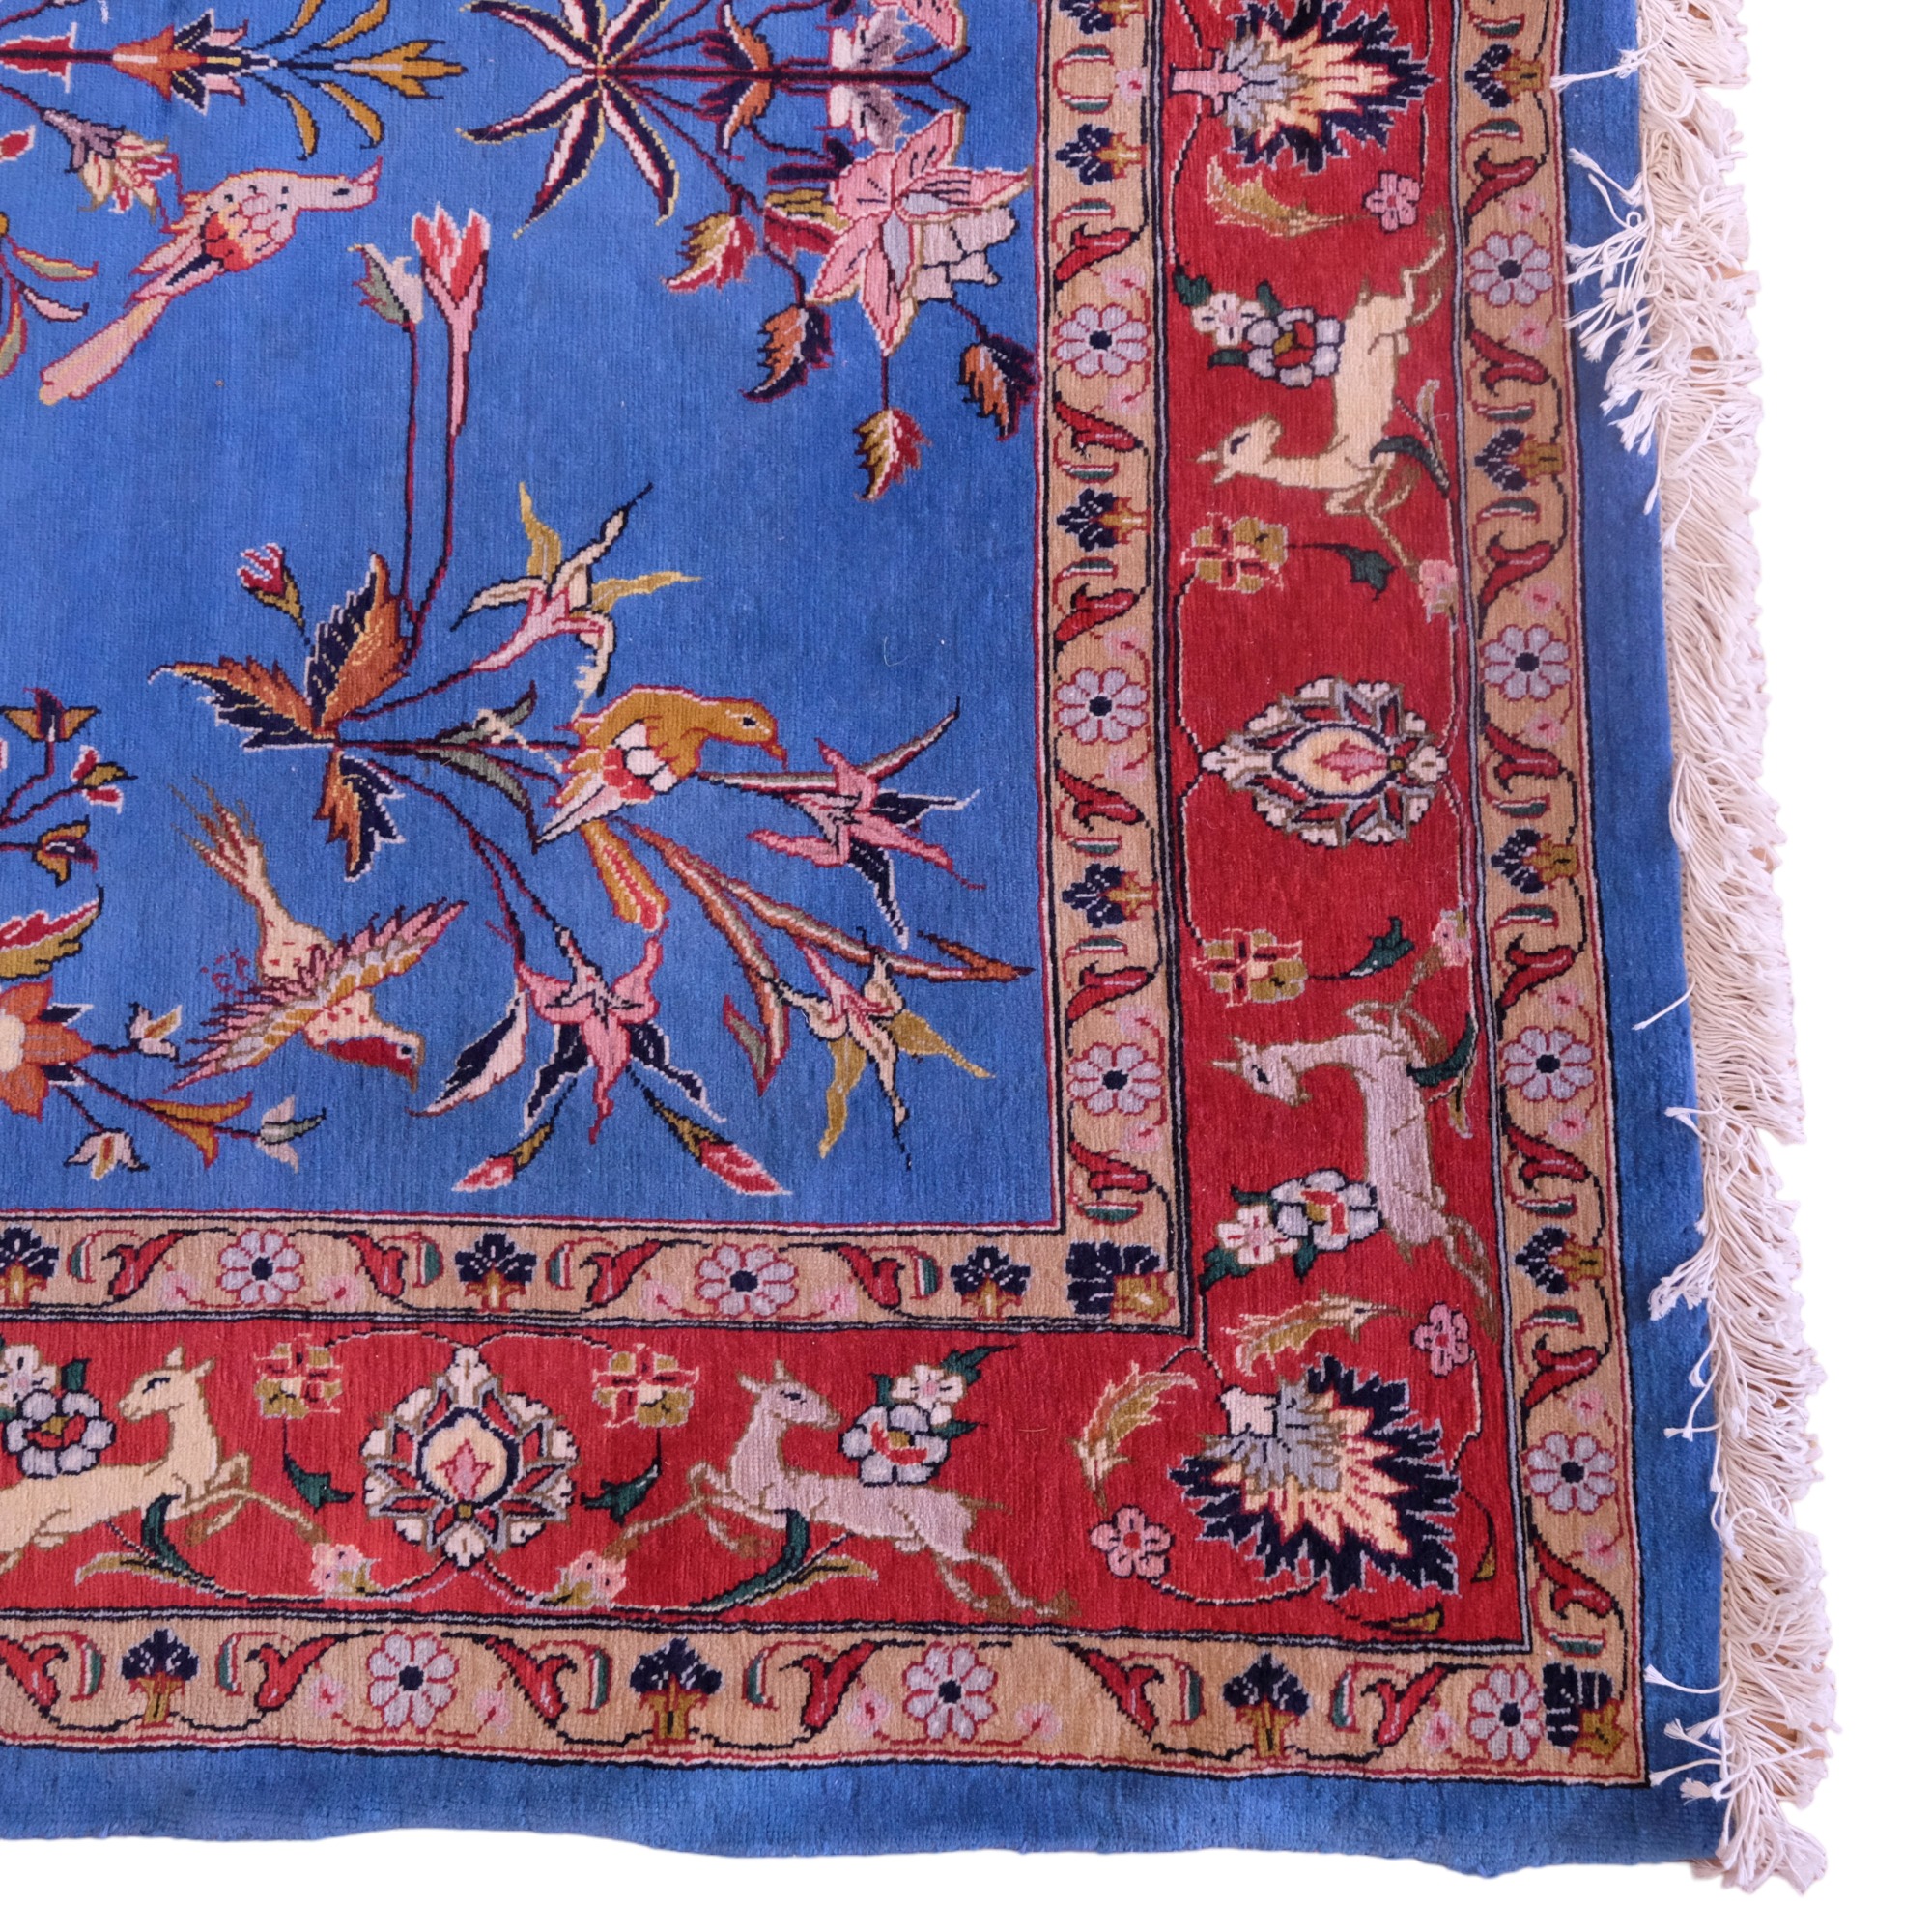 A very fine antique Persian Sarough / Zaronim hand-knotted wool-pile rug, decorated with deer, fawn, - Image 6 of 10